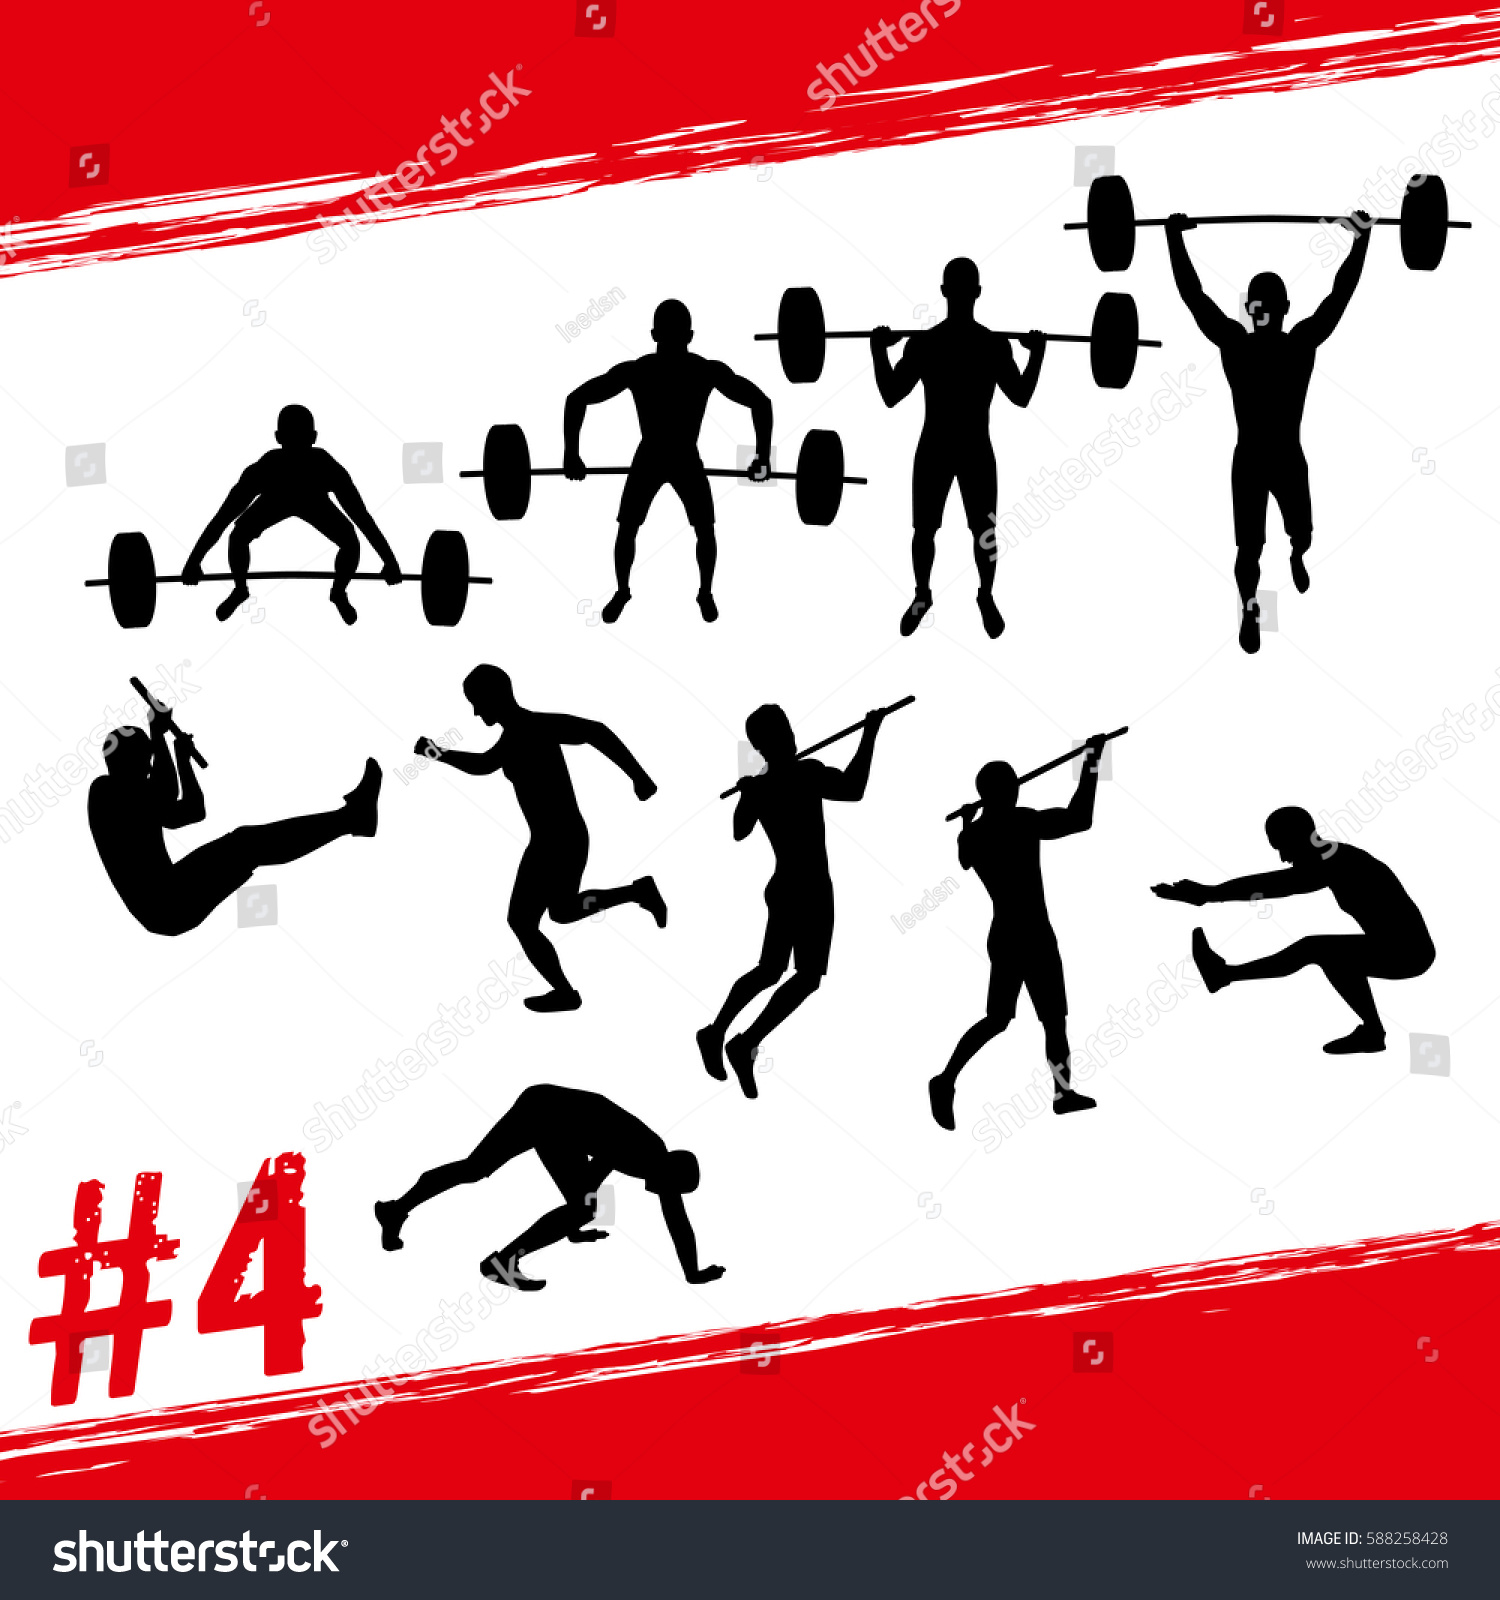 SVG of Crossfit concept. Vector silhouettes of people doing fitness and crossfit workouts in many different position. Active and healthy life concept svg